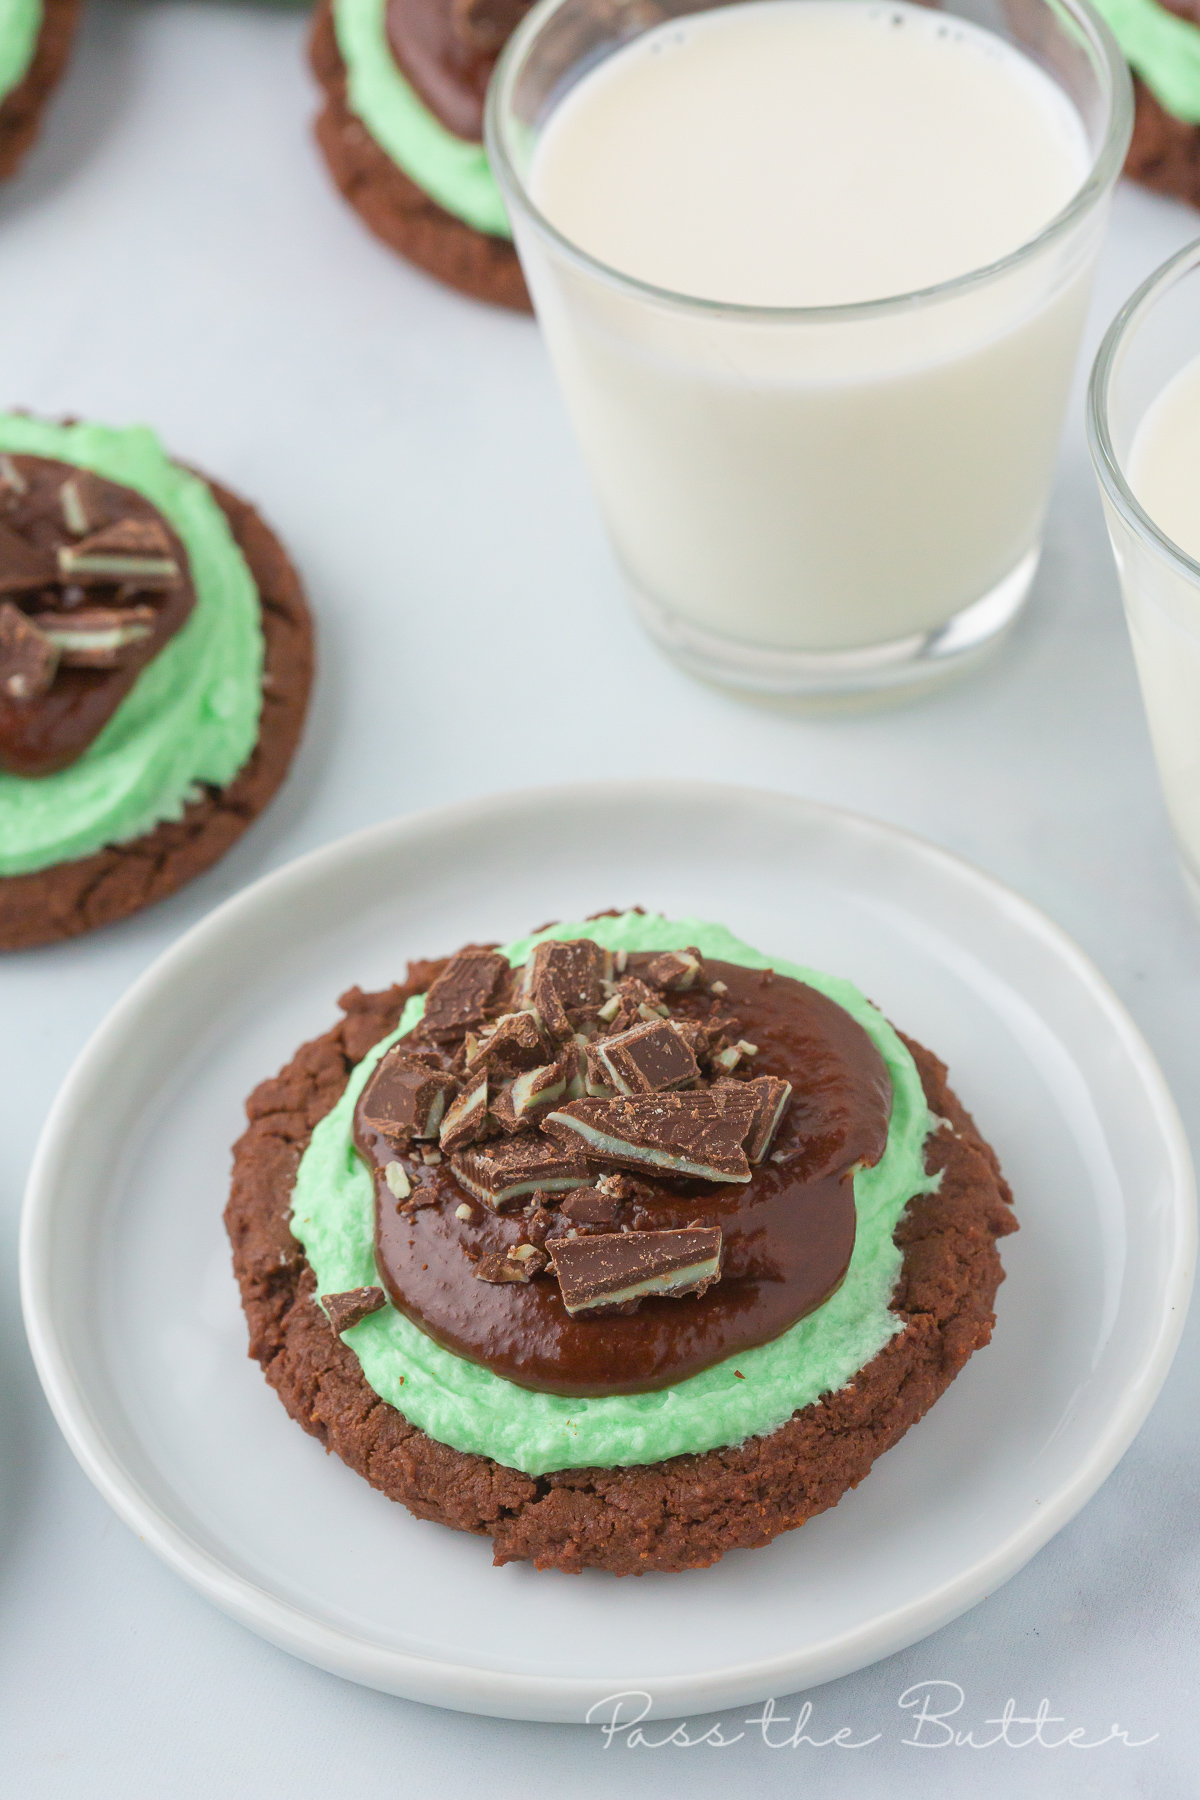 Grasshopper cookie on a plate wit a glass of milk behind it.